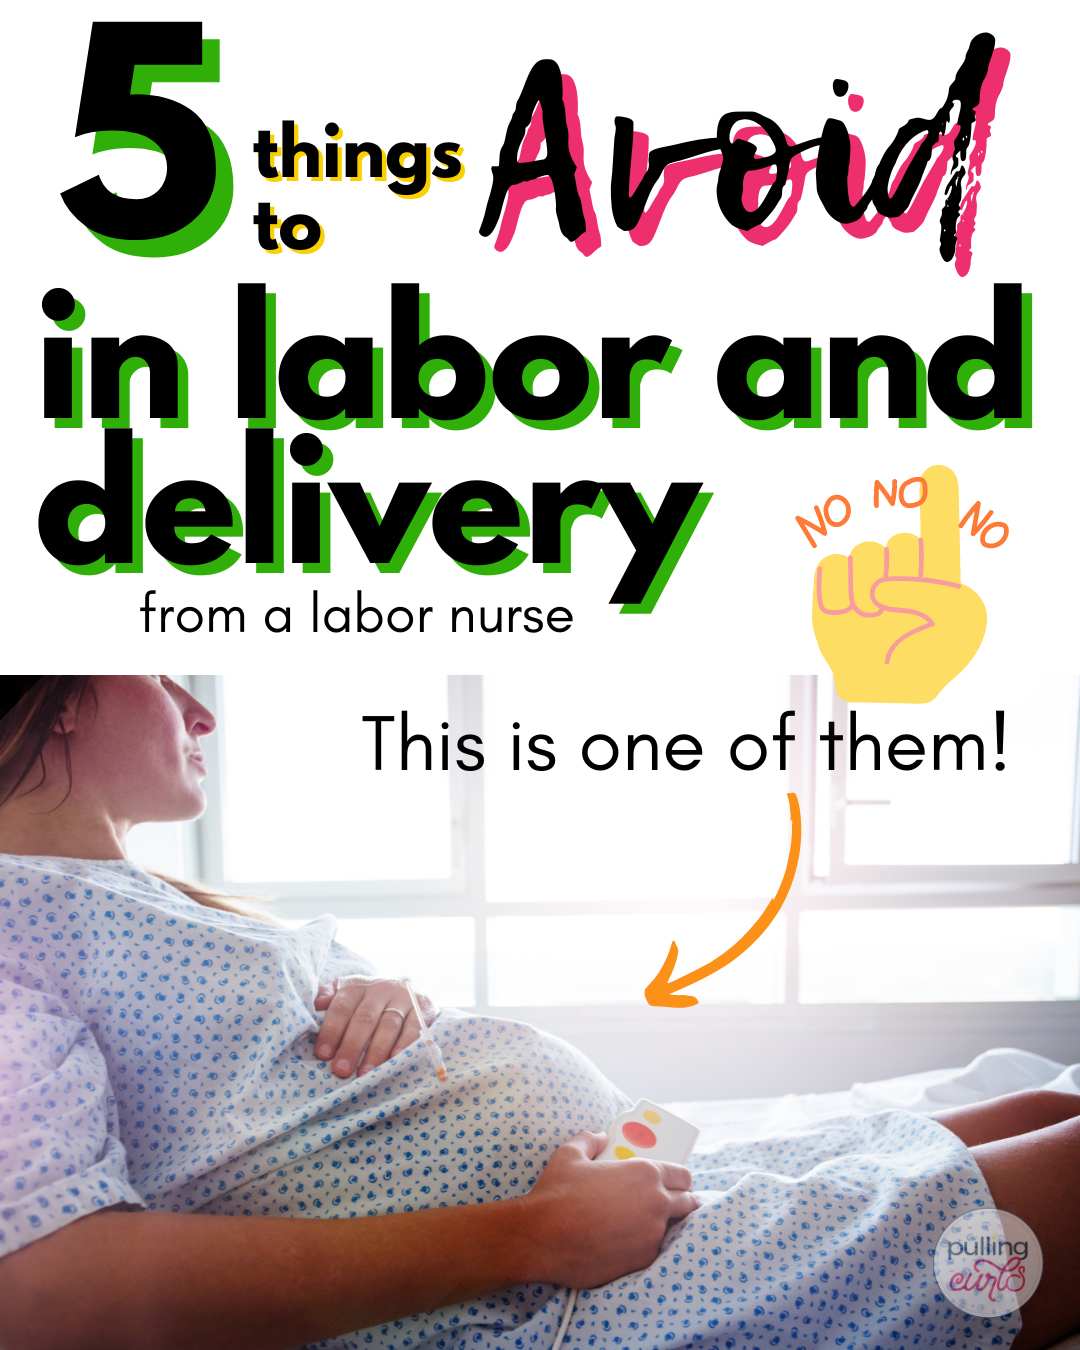 5 things to avoid in labor and deliver y / pregnant woman in hospital bed via @pullingcurls